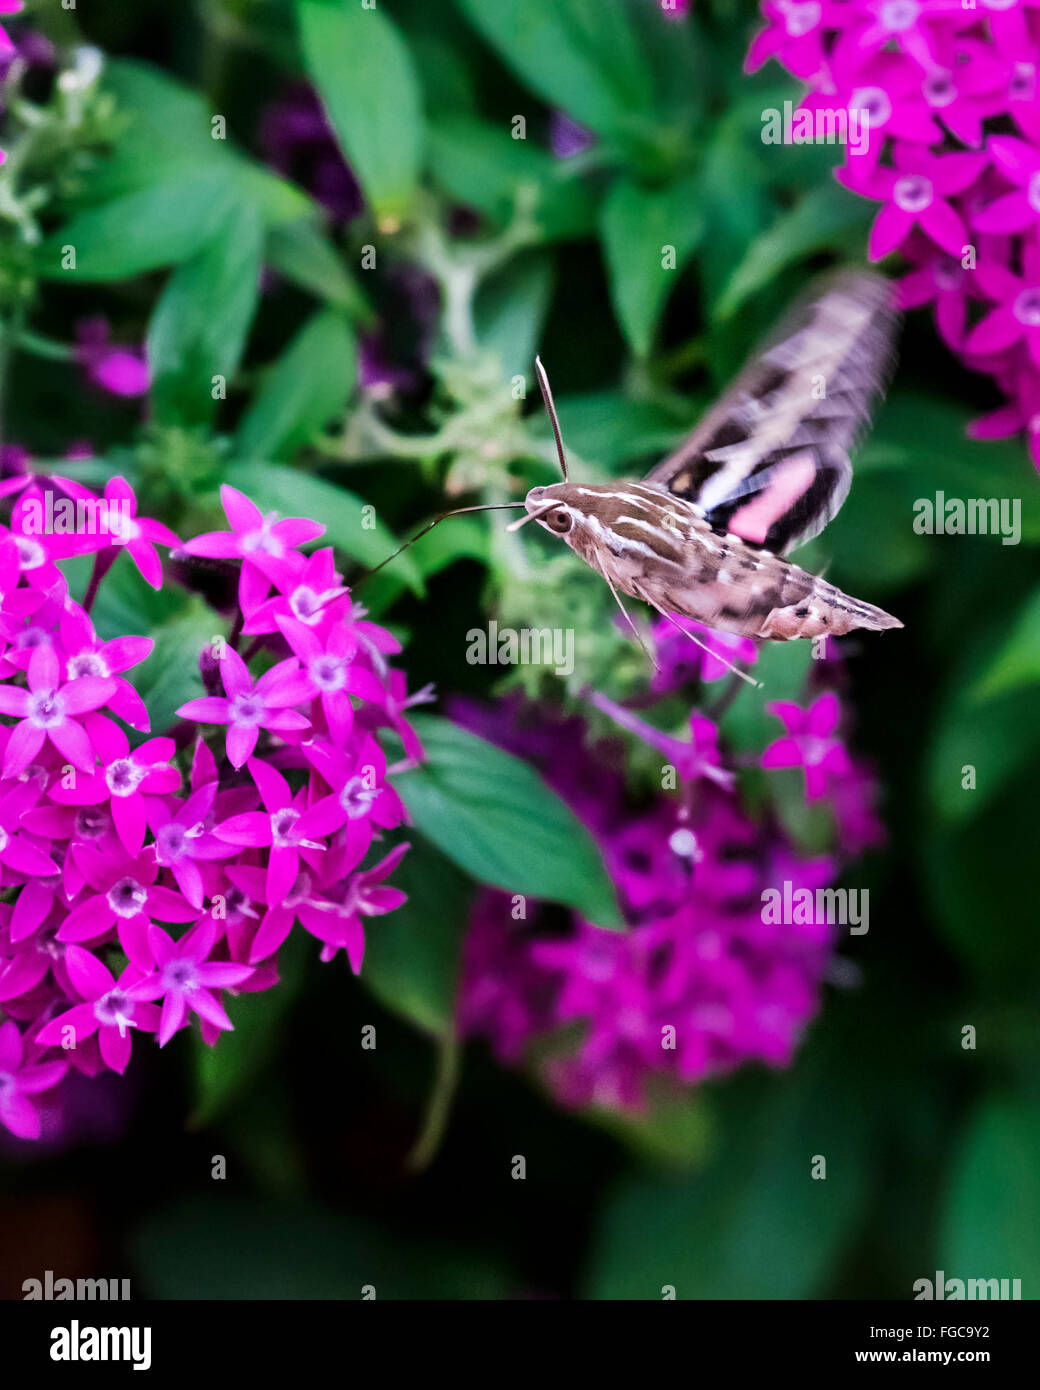 A White-lined sphinx moth, Hyles lineata, nectars on Pentas lanceolata flowers in late evening in Oklahoma, USA. Stock Photo